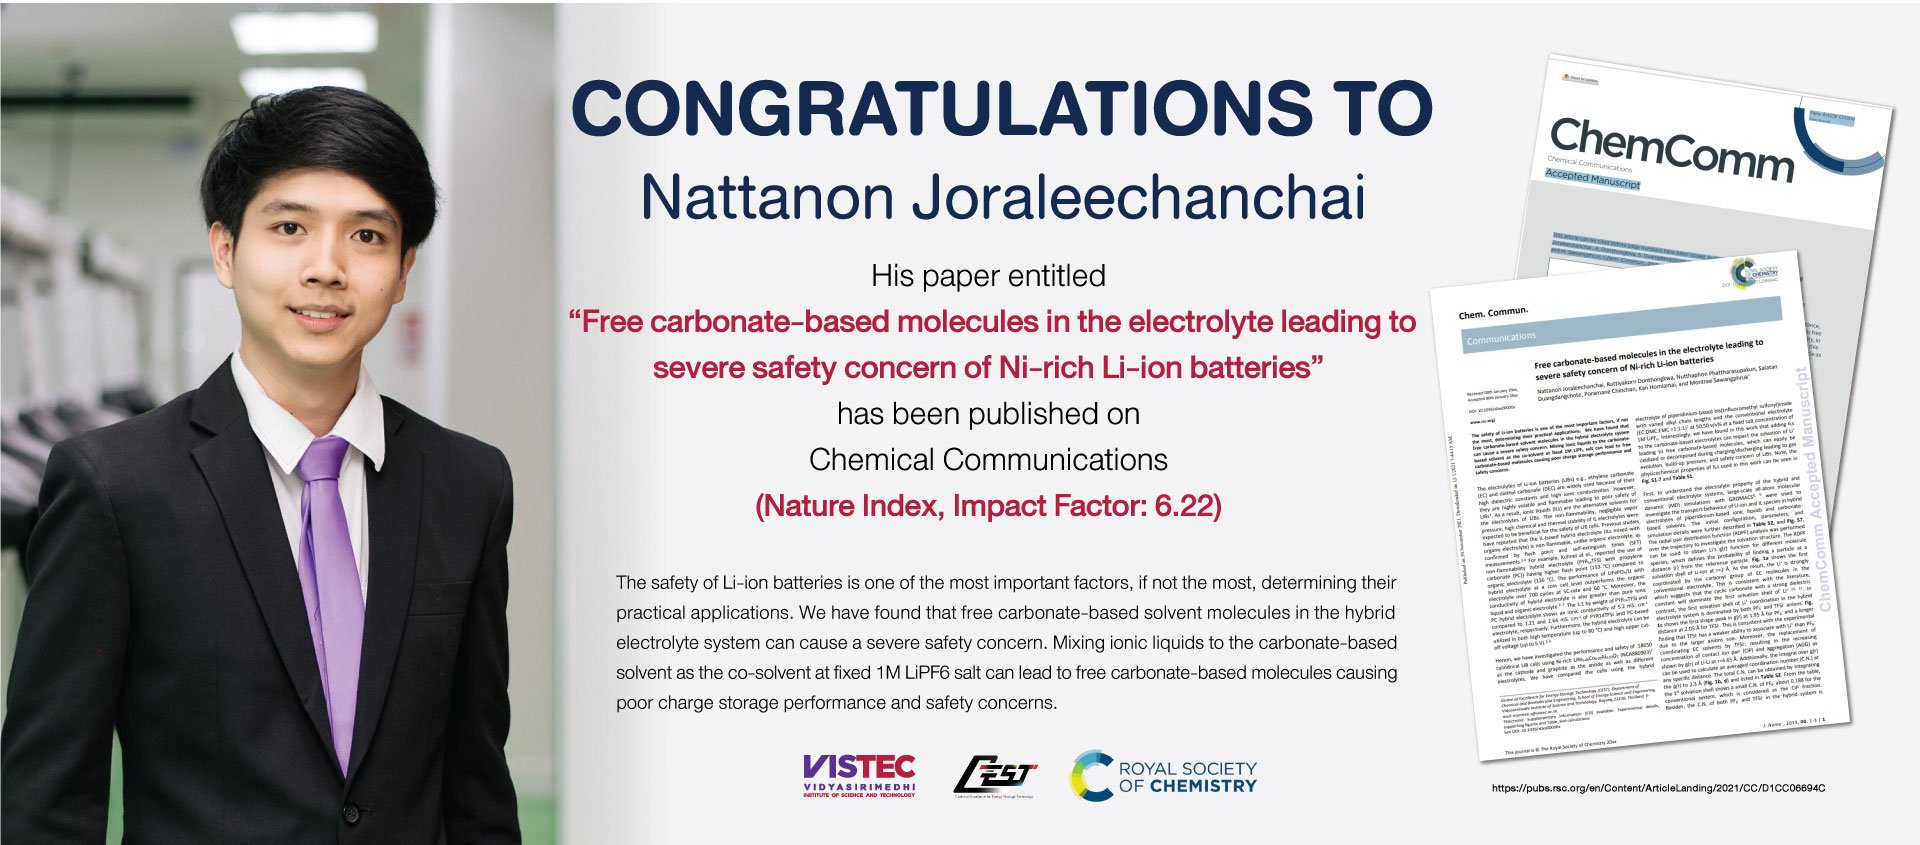 Congratulations ! to Nattanon Joraleechanchai, his paper entitled “Free carbonate-based molecules in the electrolyte leading to severe safety concern of Ni-rich Li-ion batteries” has been published online by Chemical Communications (Nature Index).